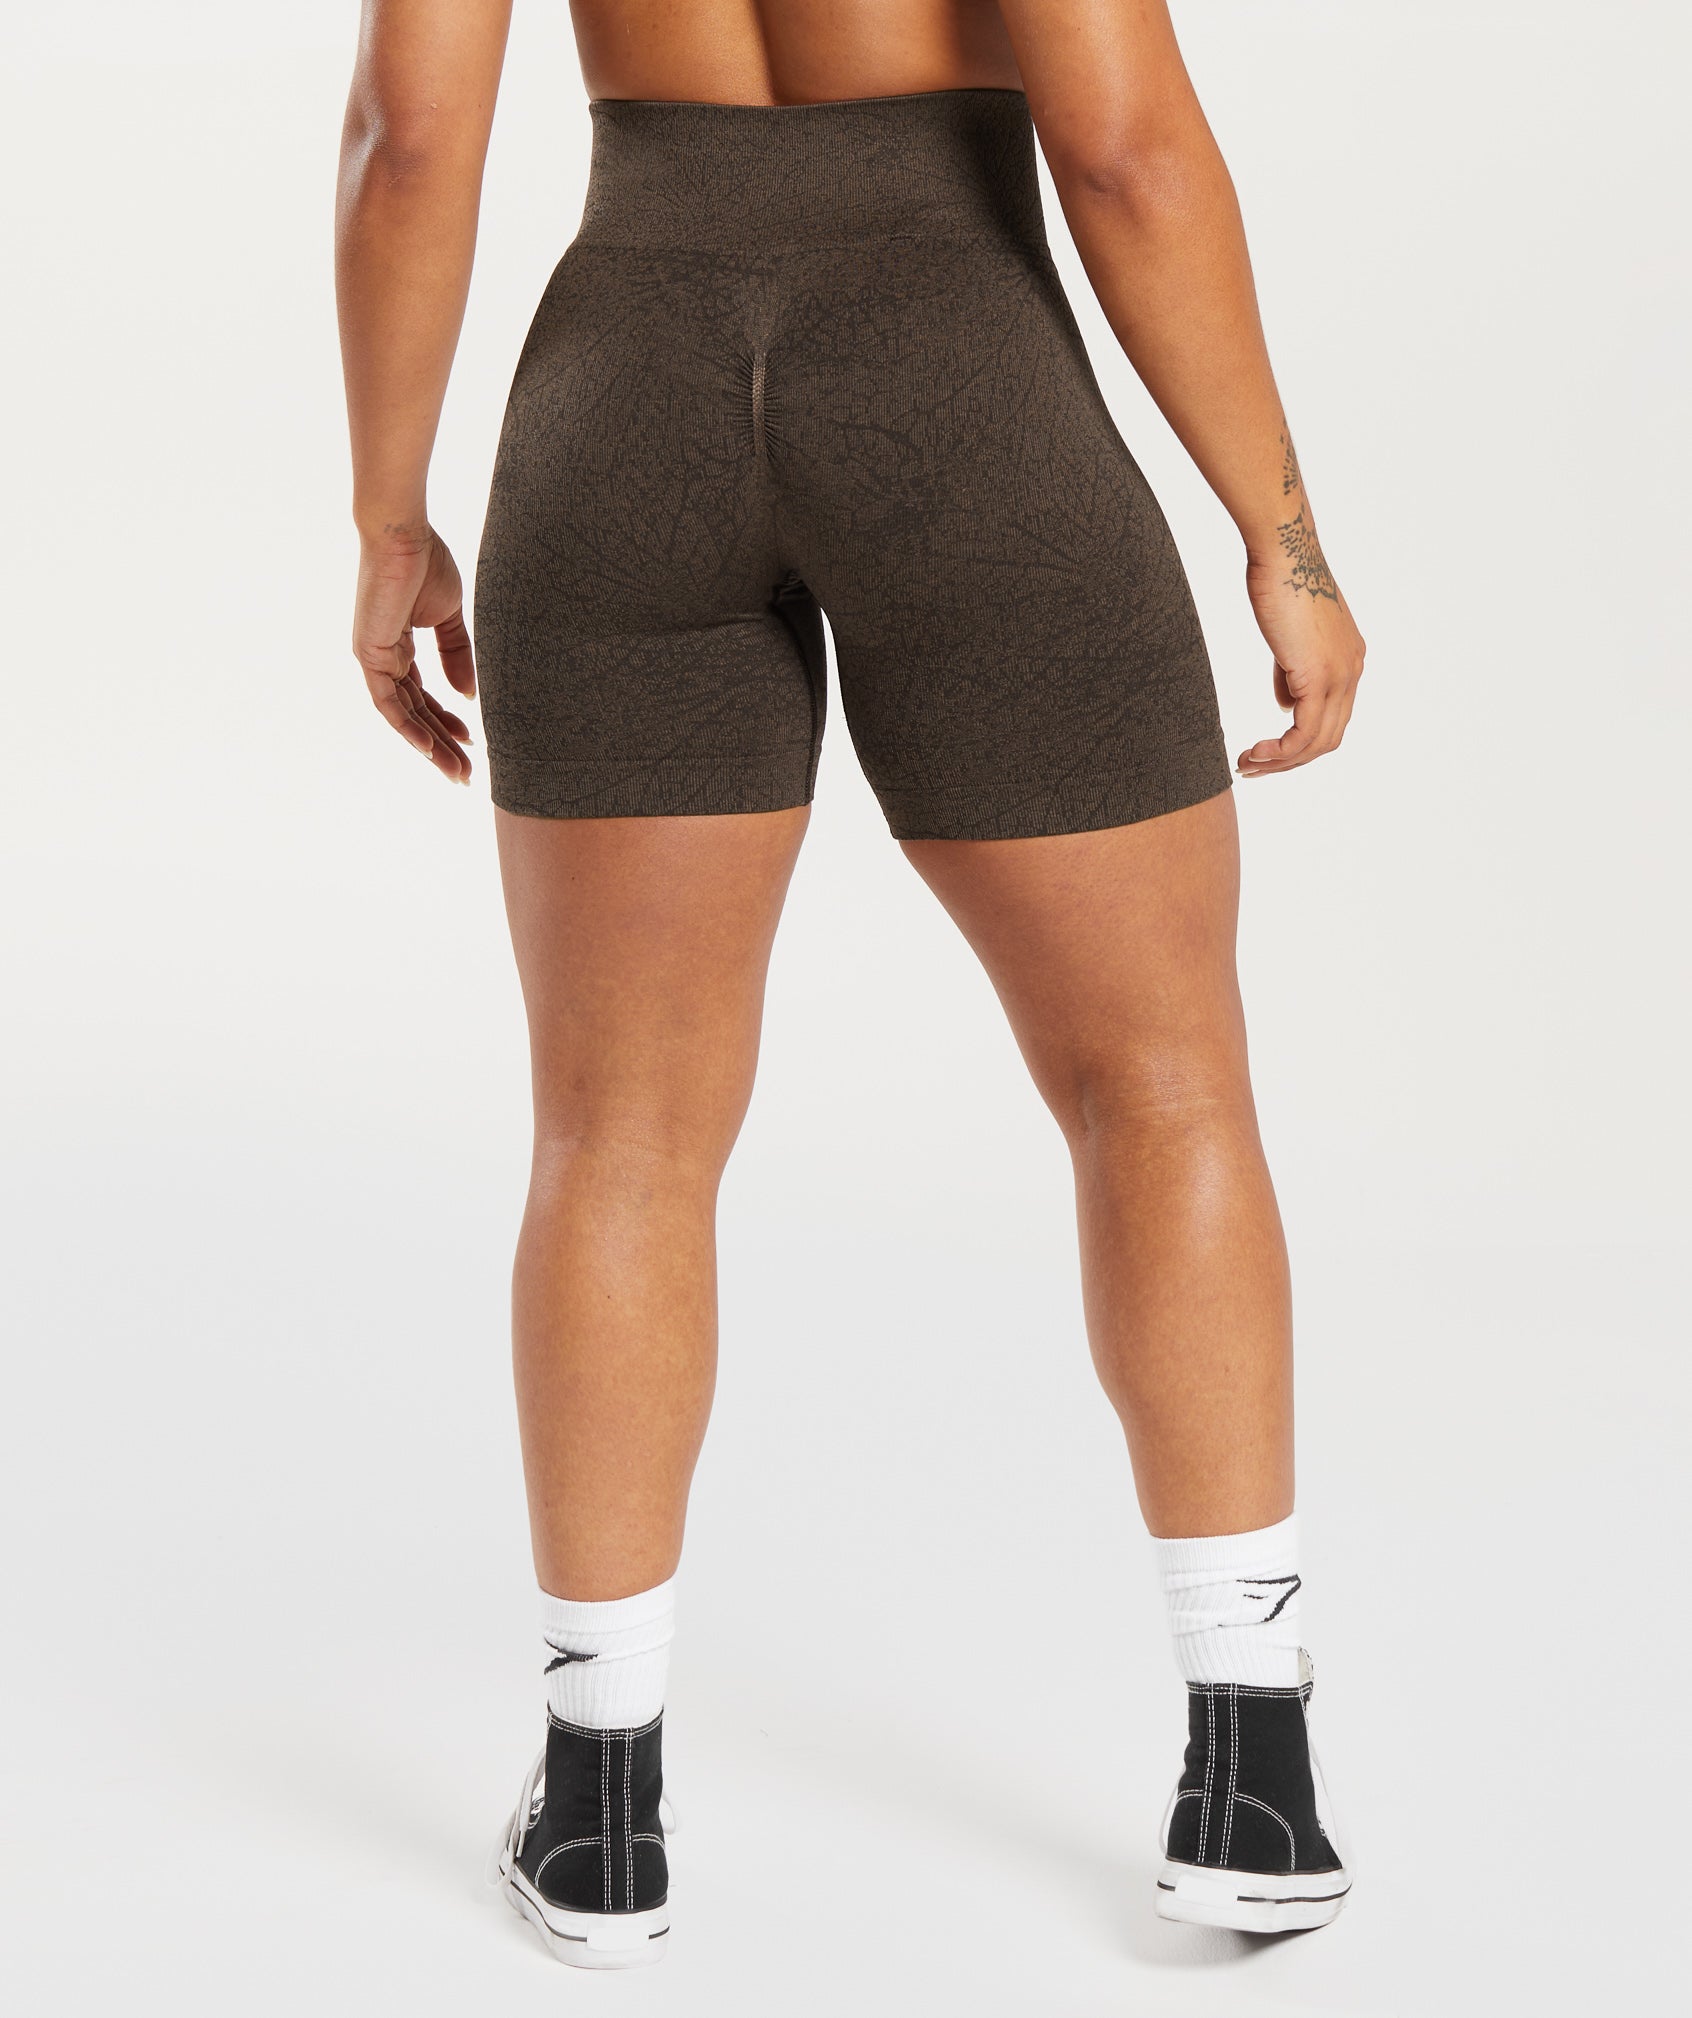 Adapt Pattern Seamless Shorts in Woodland Brown/Soul Brown - view 2